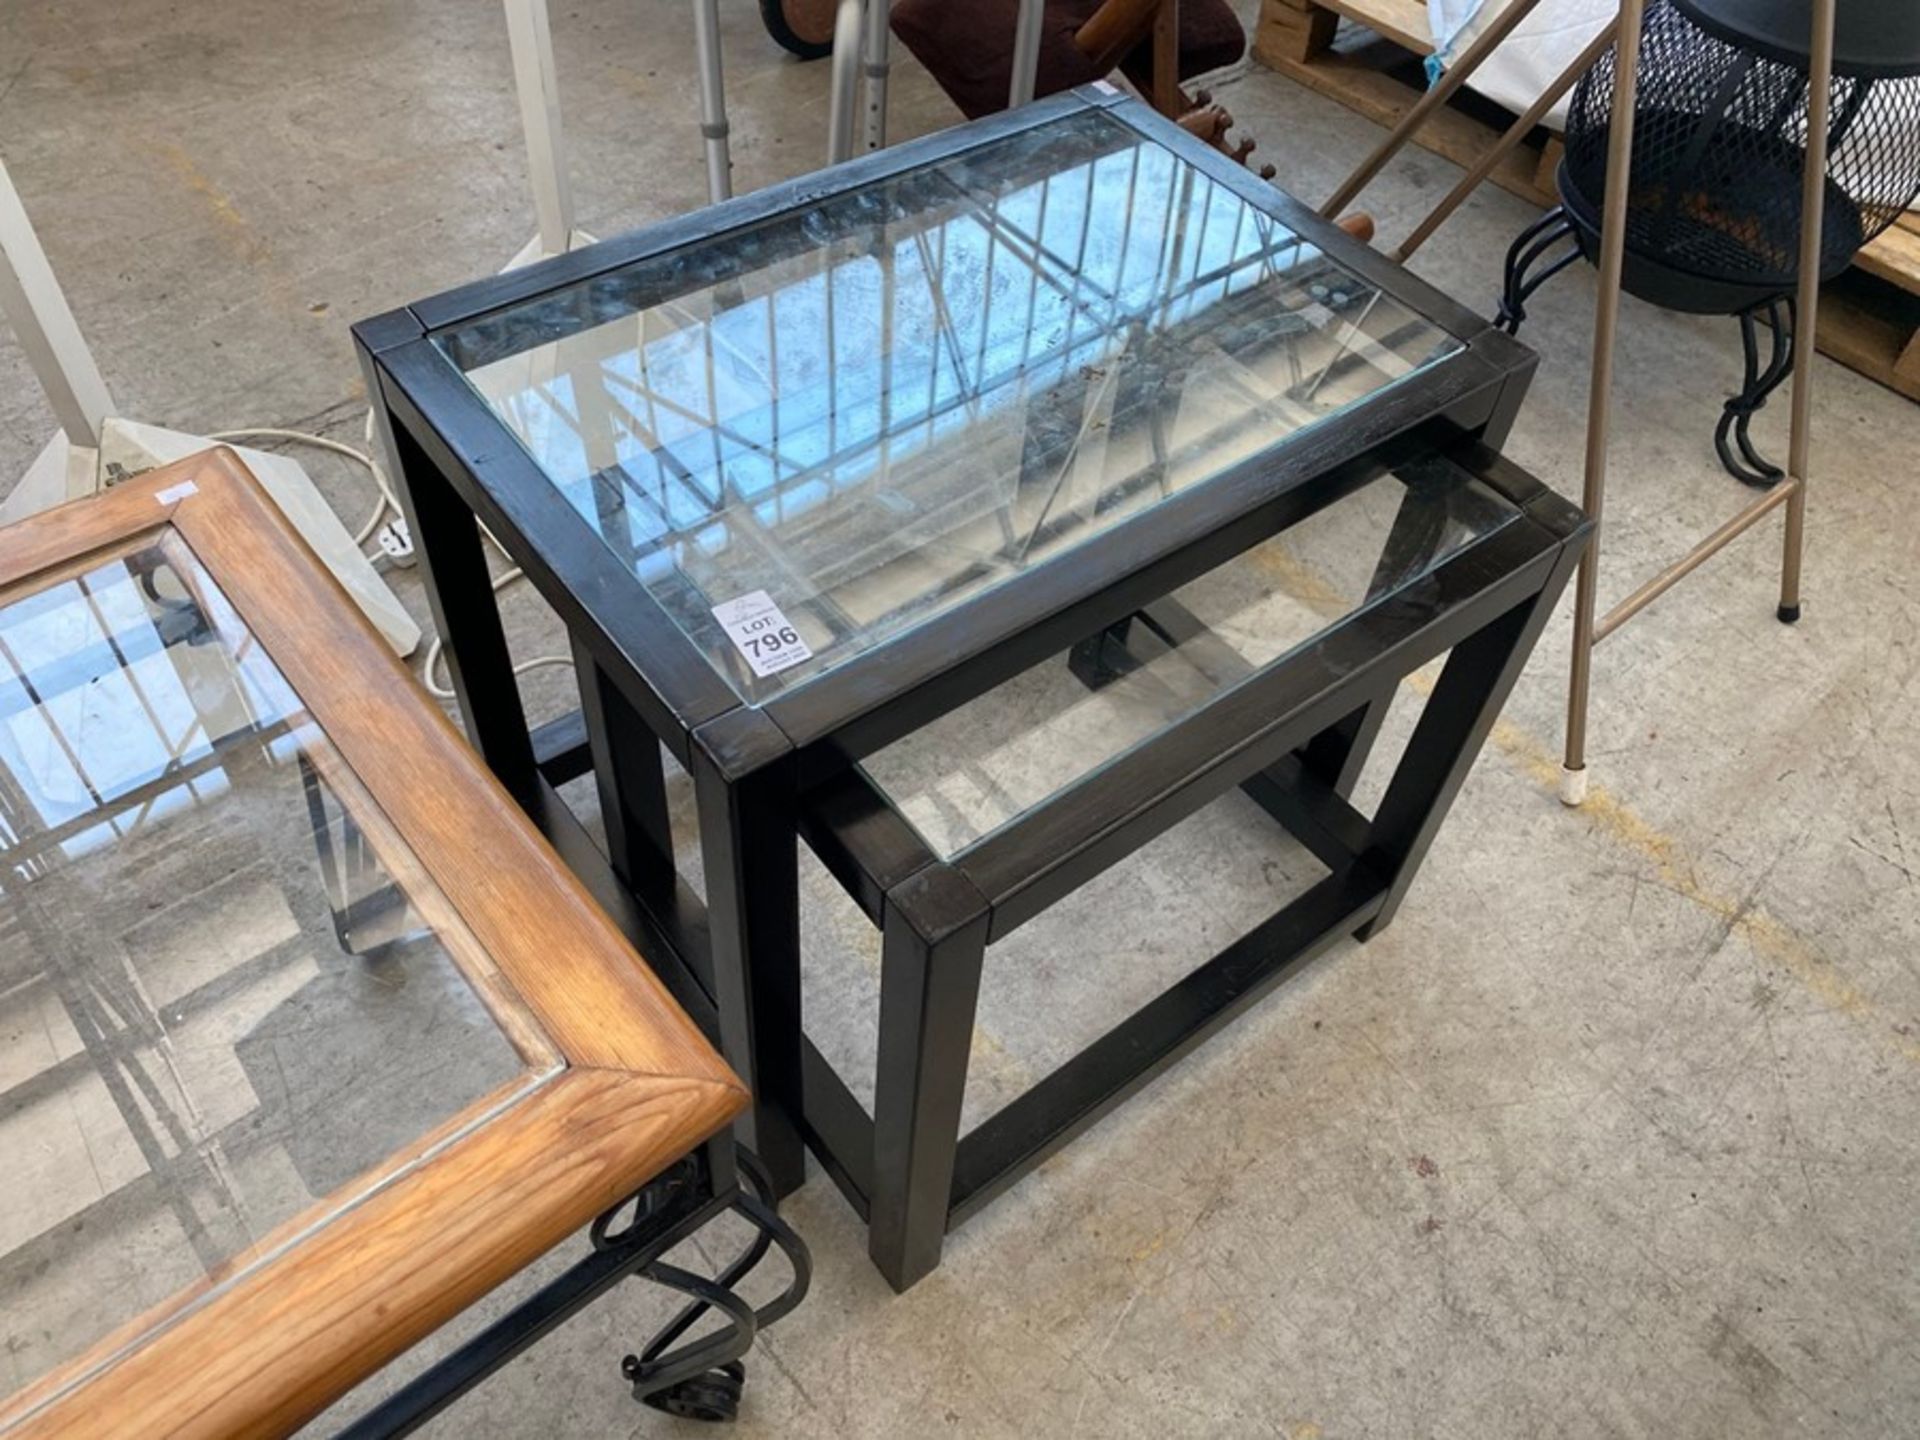 2 GLASS TOPPED COFFEE TABLES